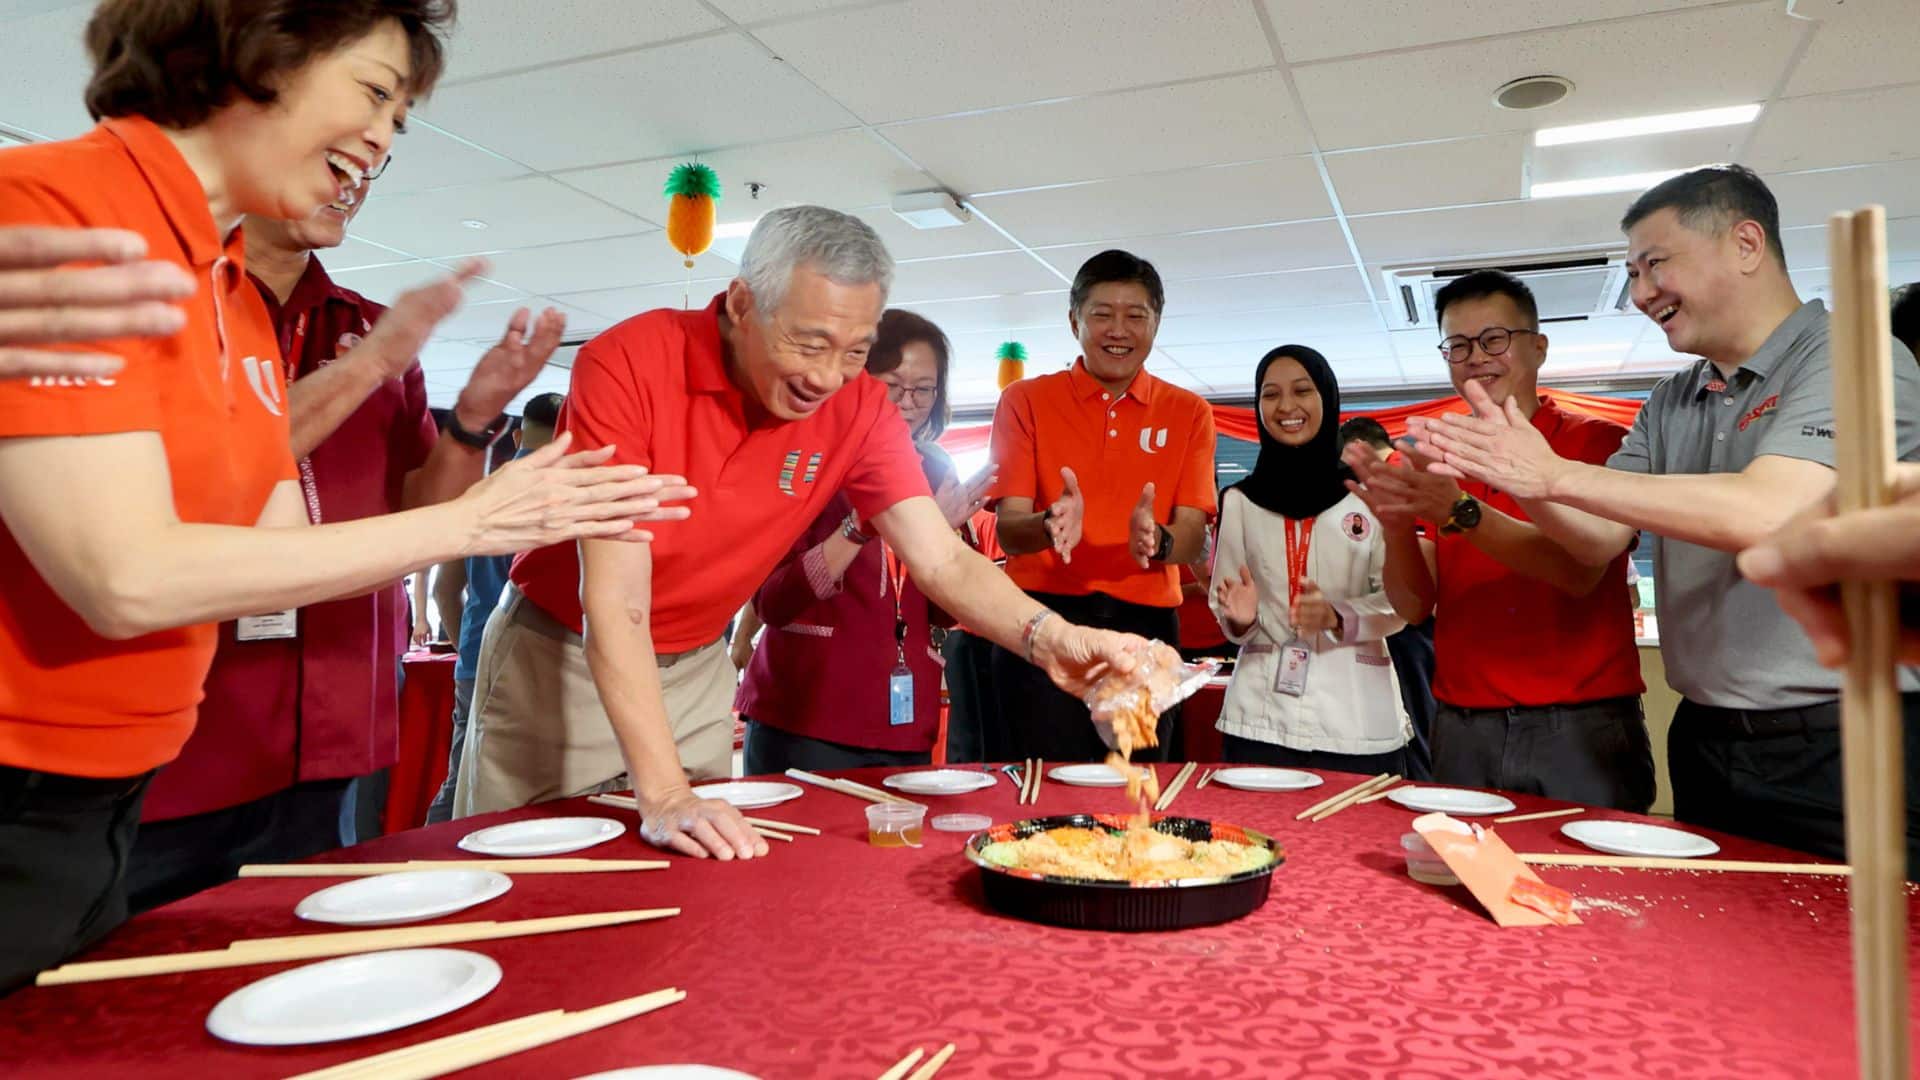 PM Lee tossing of yusheng (Mandarin for "raw fish"), a Chinese New Year tradition, with representatives from the National Trades Union Congress (NTUC), National Transport Workers’ Union (NTWU), transport operator SMRT, as well as transport workers. 